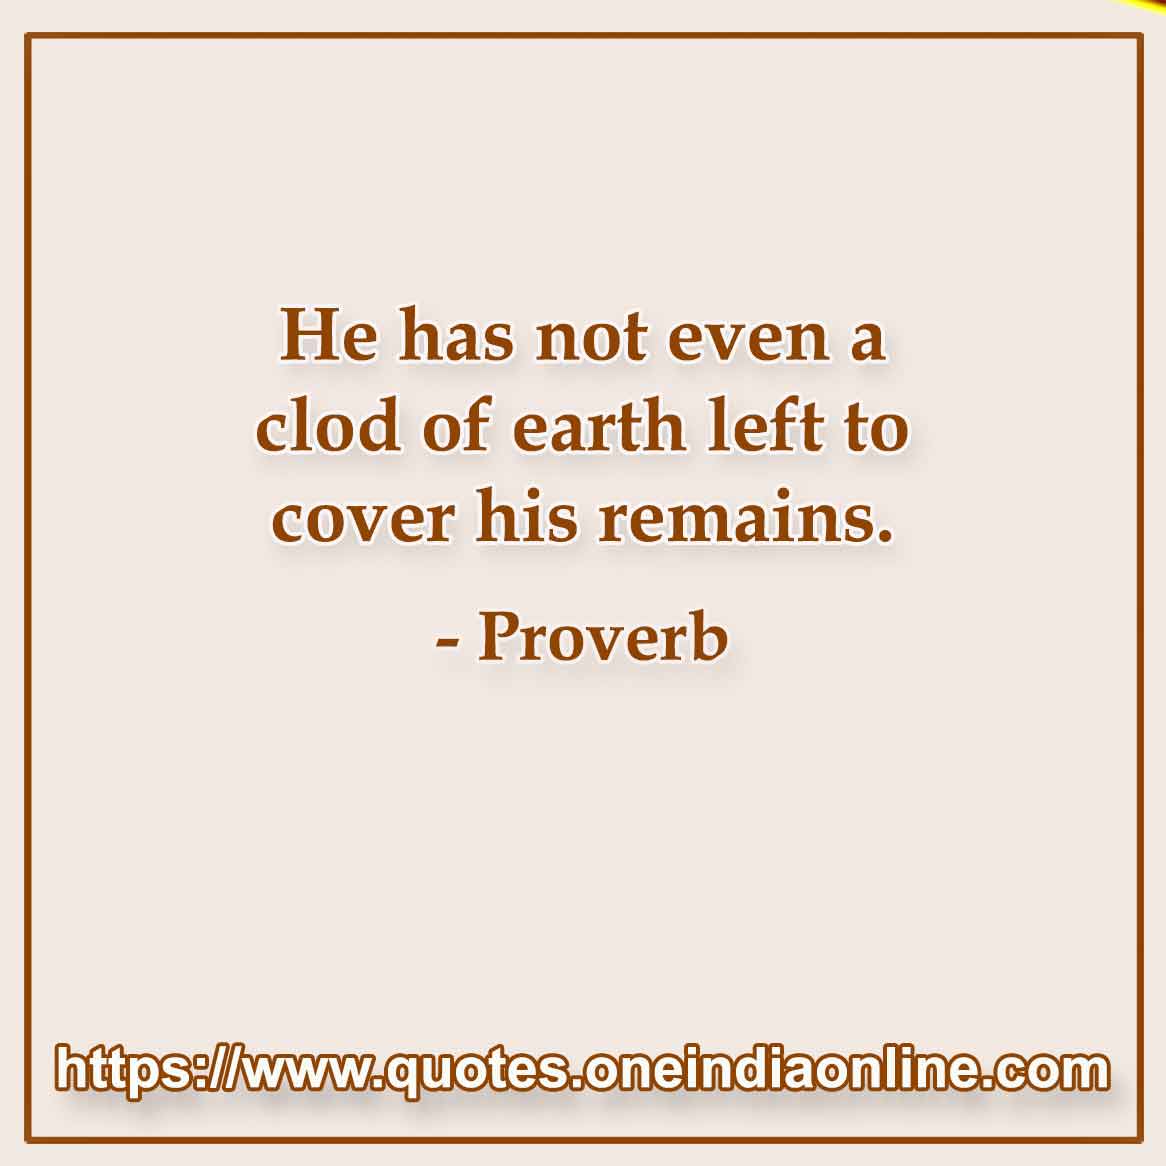 He has not even a clod of earth left to cover his remains.

Latin Proverbs 